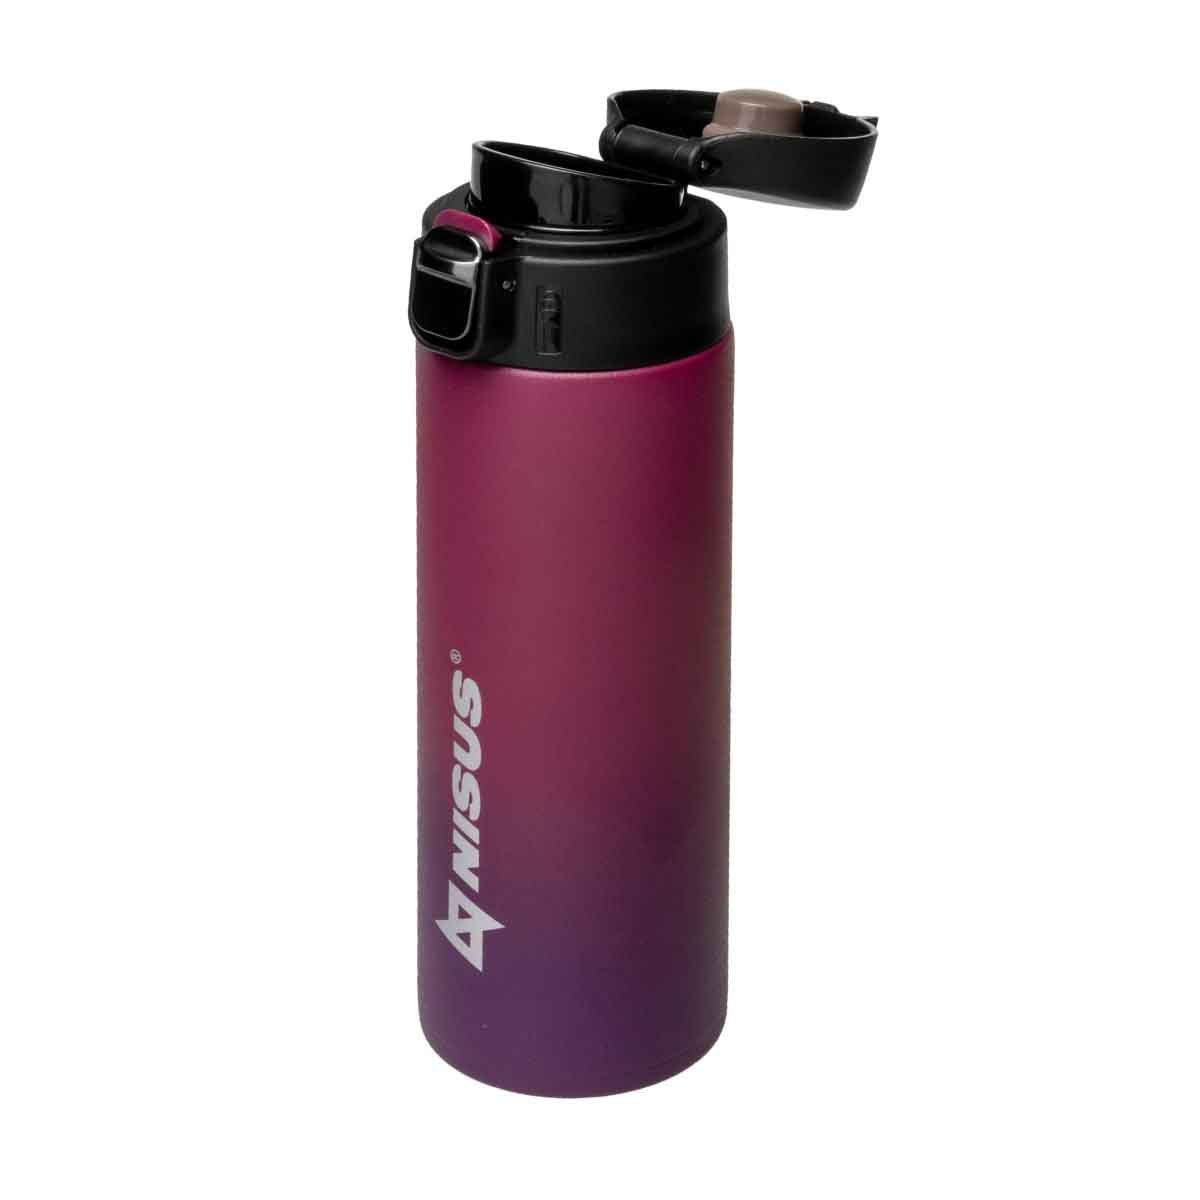 Compact Stainless Steel Insulated Water Bottle, Red, 14 oz featuring a push button lid